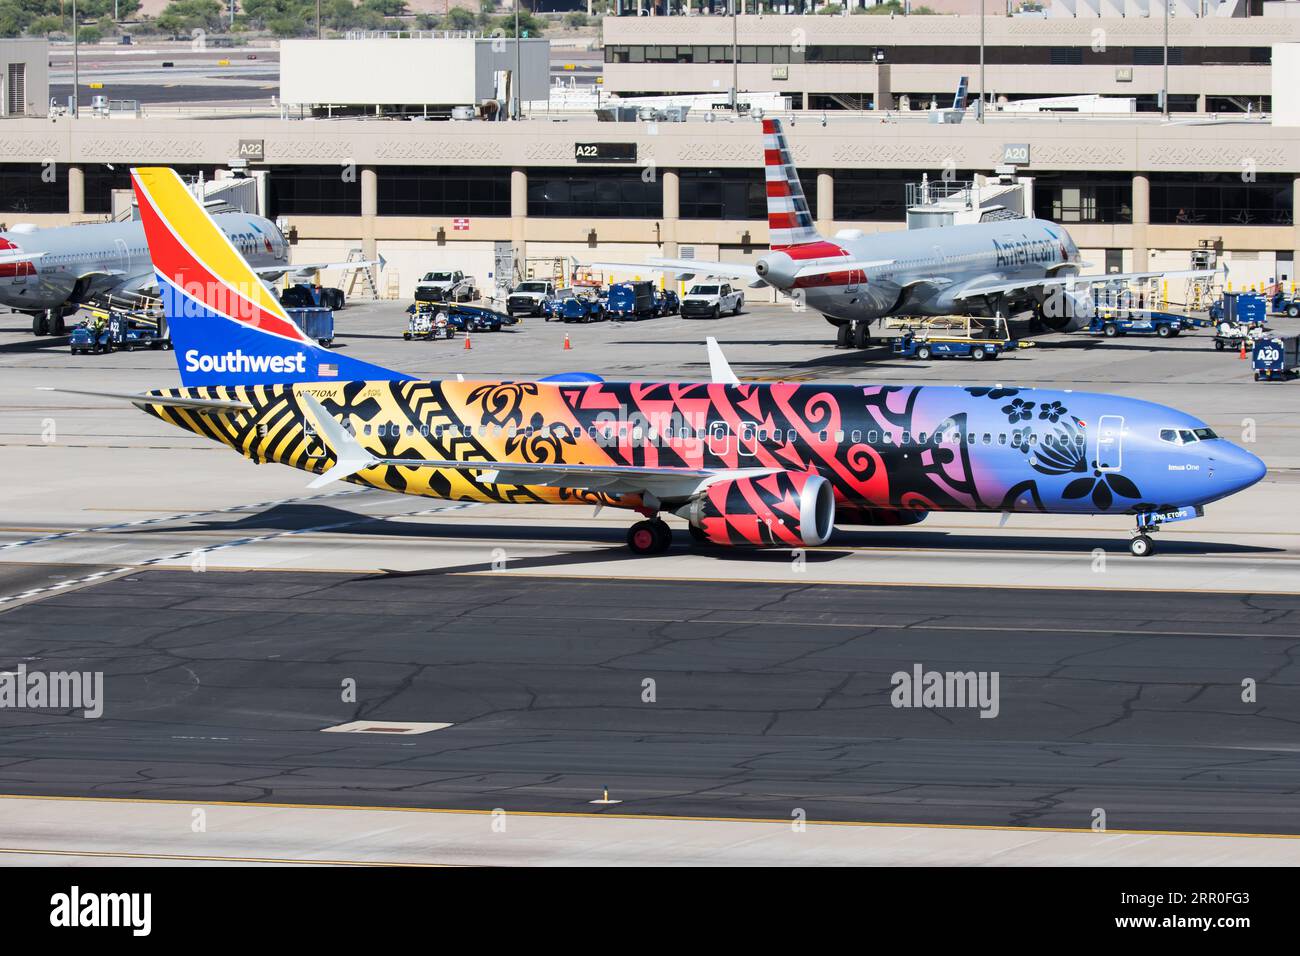 Southwest Airlines' new Hawaii state themed special livery is called Imua One, depicting the air of the native people of the islands. Stock Photo